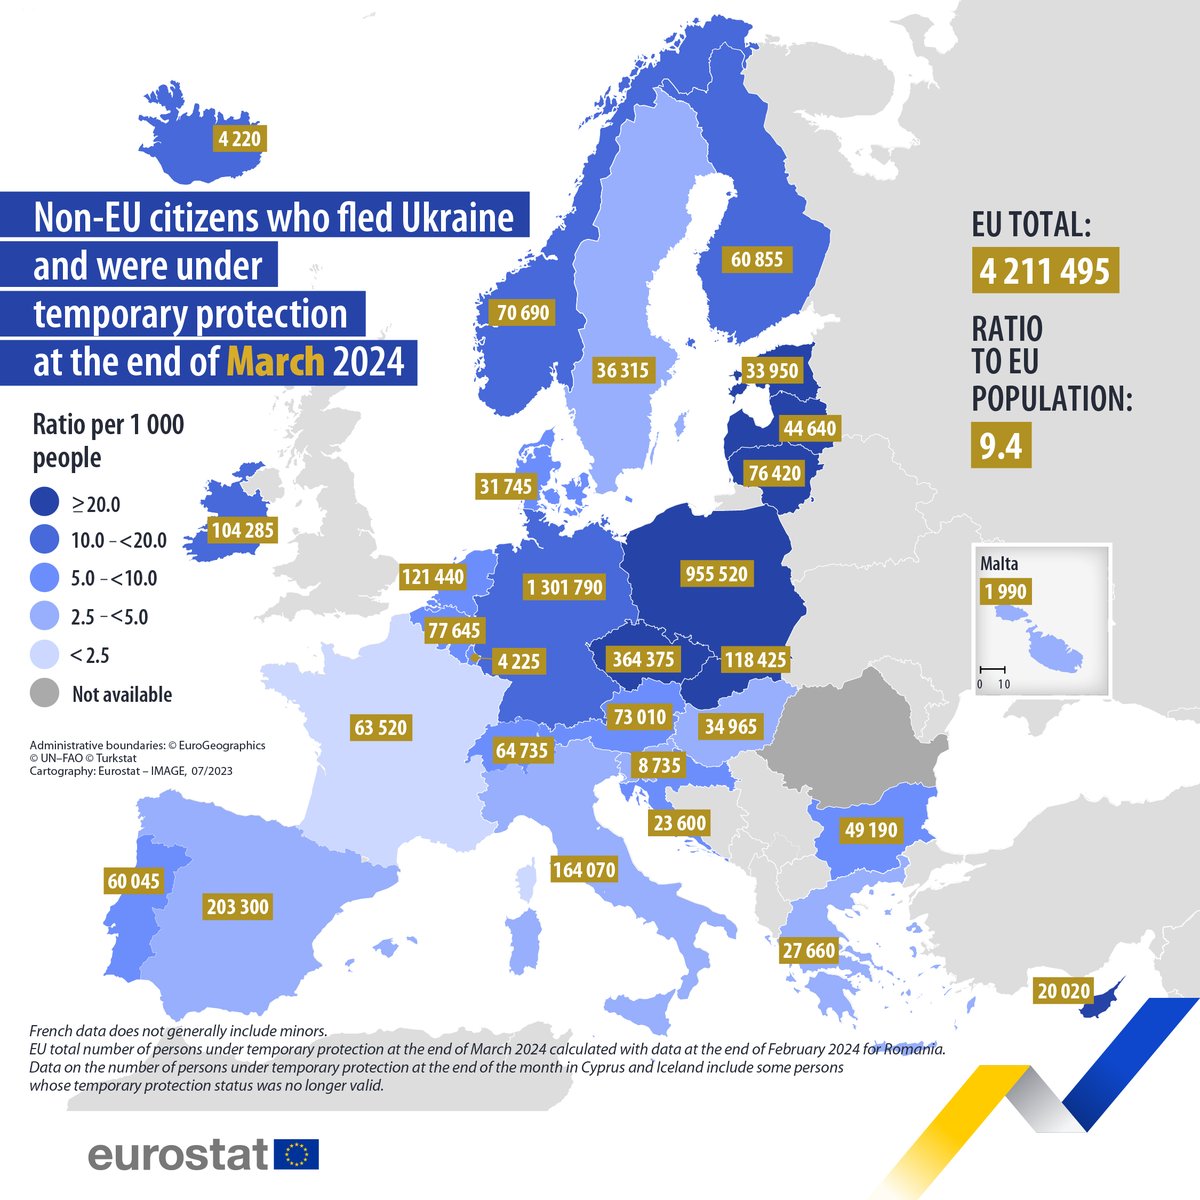 On 31 March 2024, 4.2 million non-EU citizens who fled 🇺🇦Ukraine had temporary protection status in the EU. 🛂 The EU countries hosting the most were: 🇩🇪Germany (1 301 790 people; 30.9% of total EU) 🇵🇱Poland (955 520; 22.7%) 🇨🇿Czechia (364 375; 8.7%) 👉europa.eu/!dWypqg